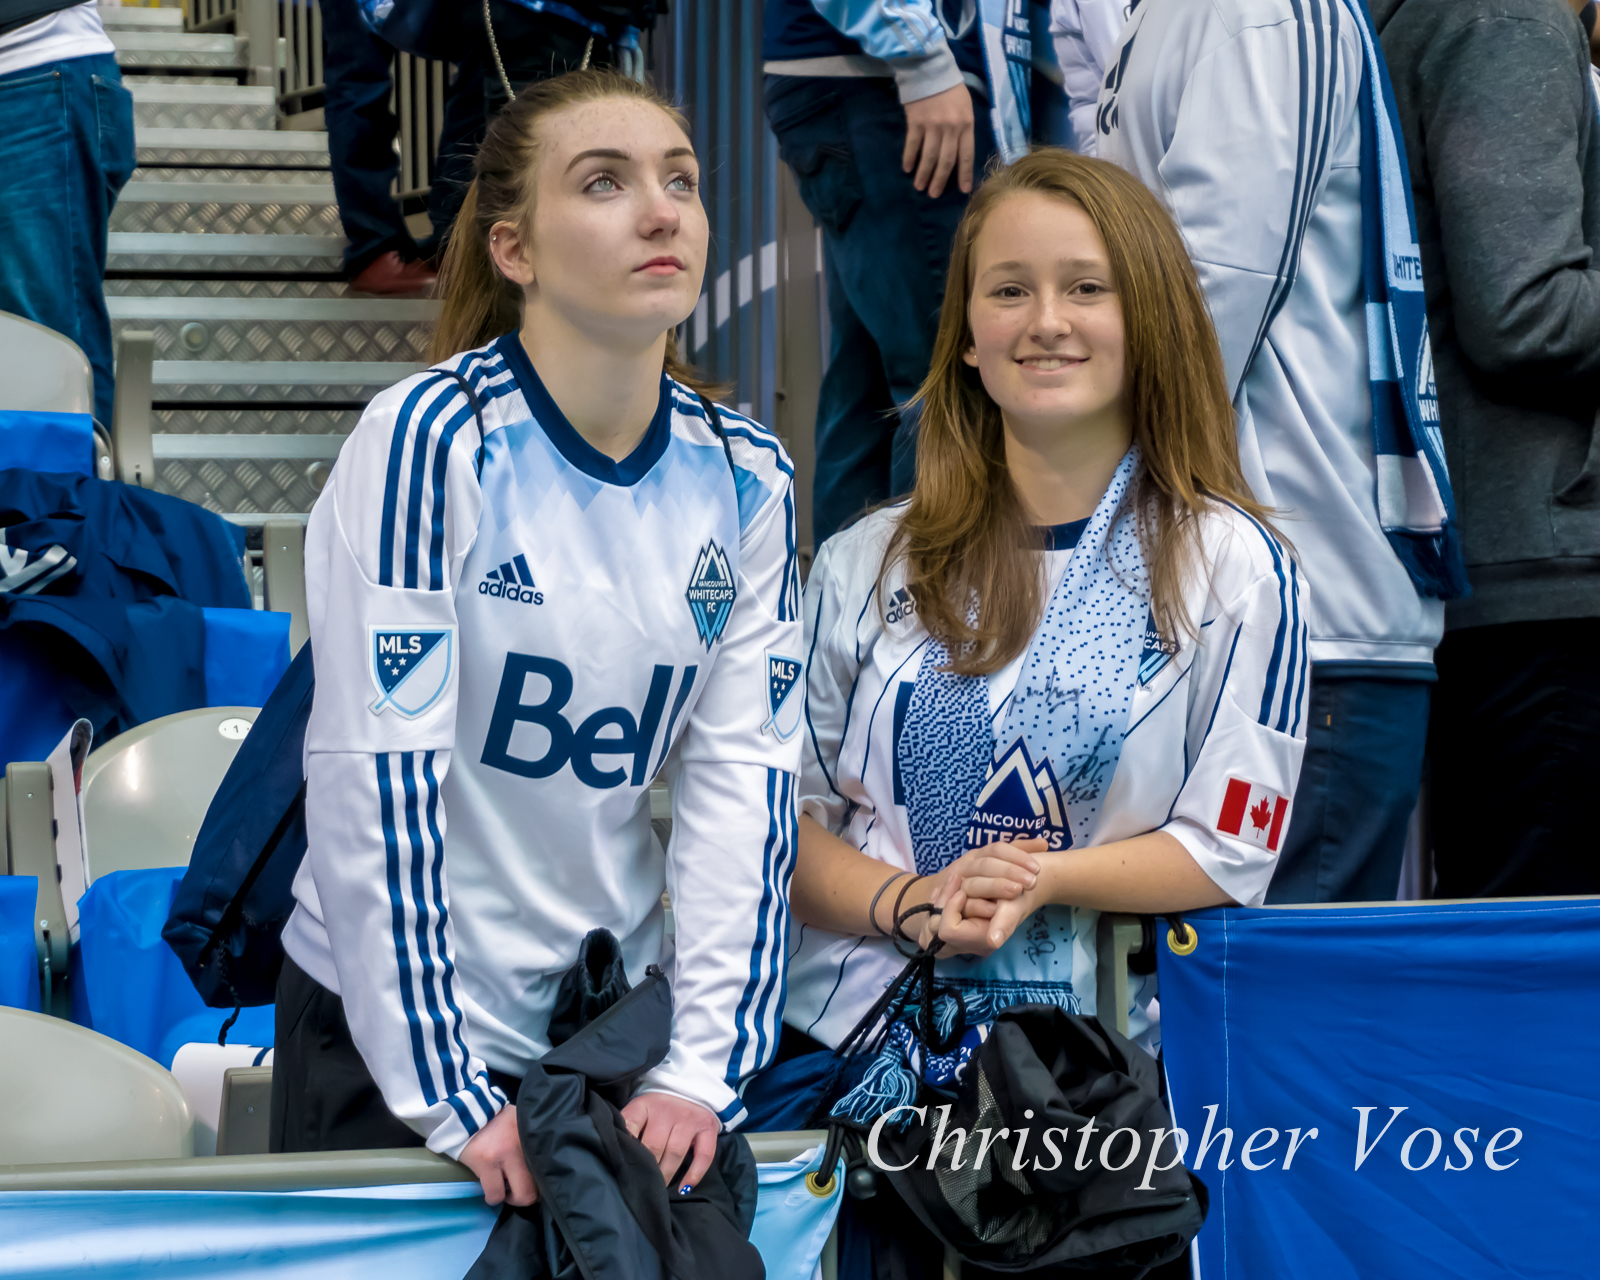 2016-03-06 Vancouver Whitecaps FC Supporters.jpg